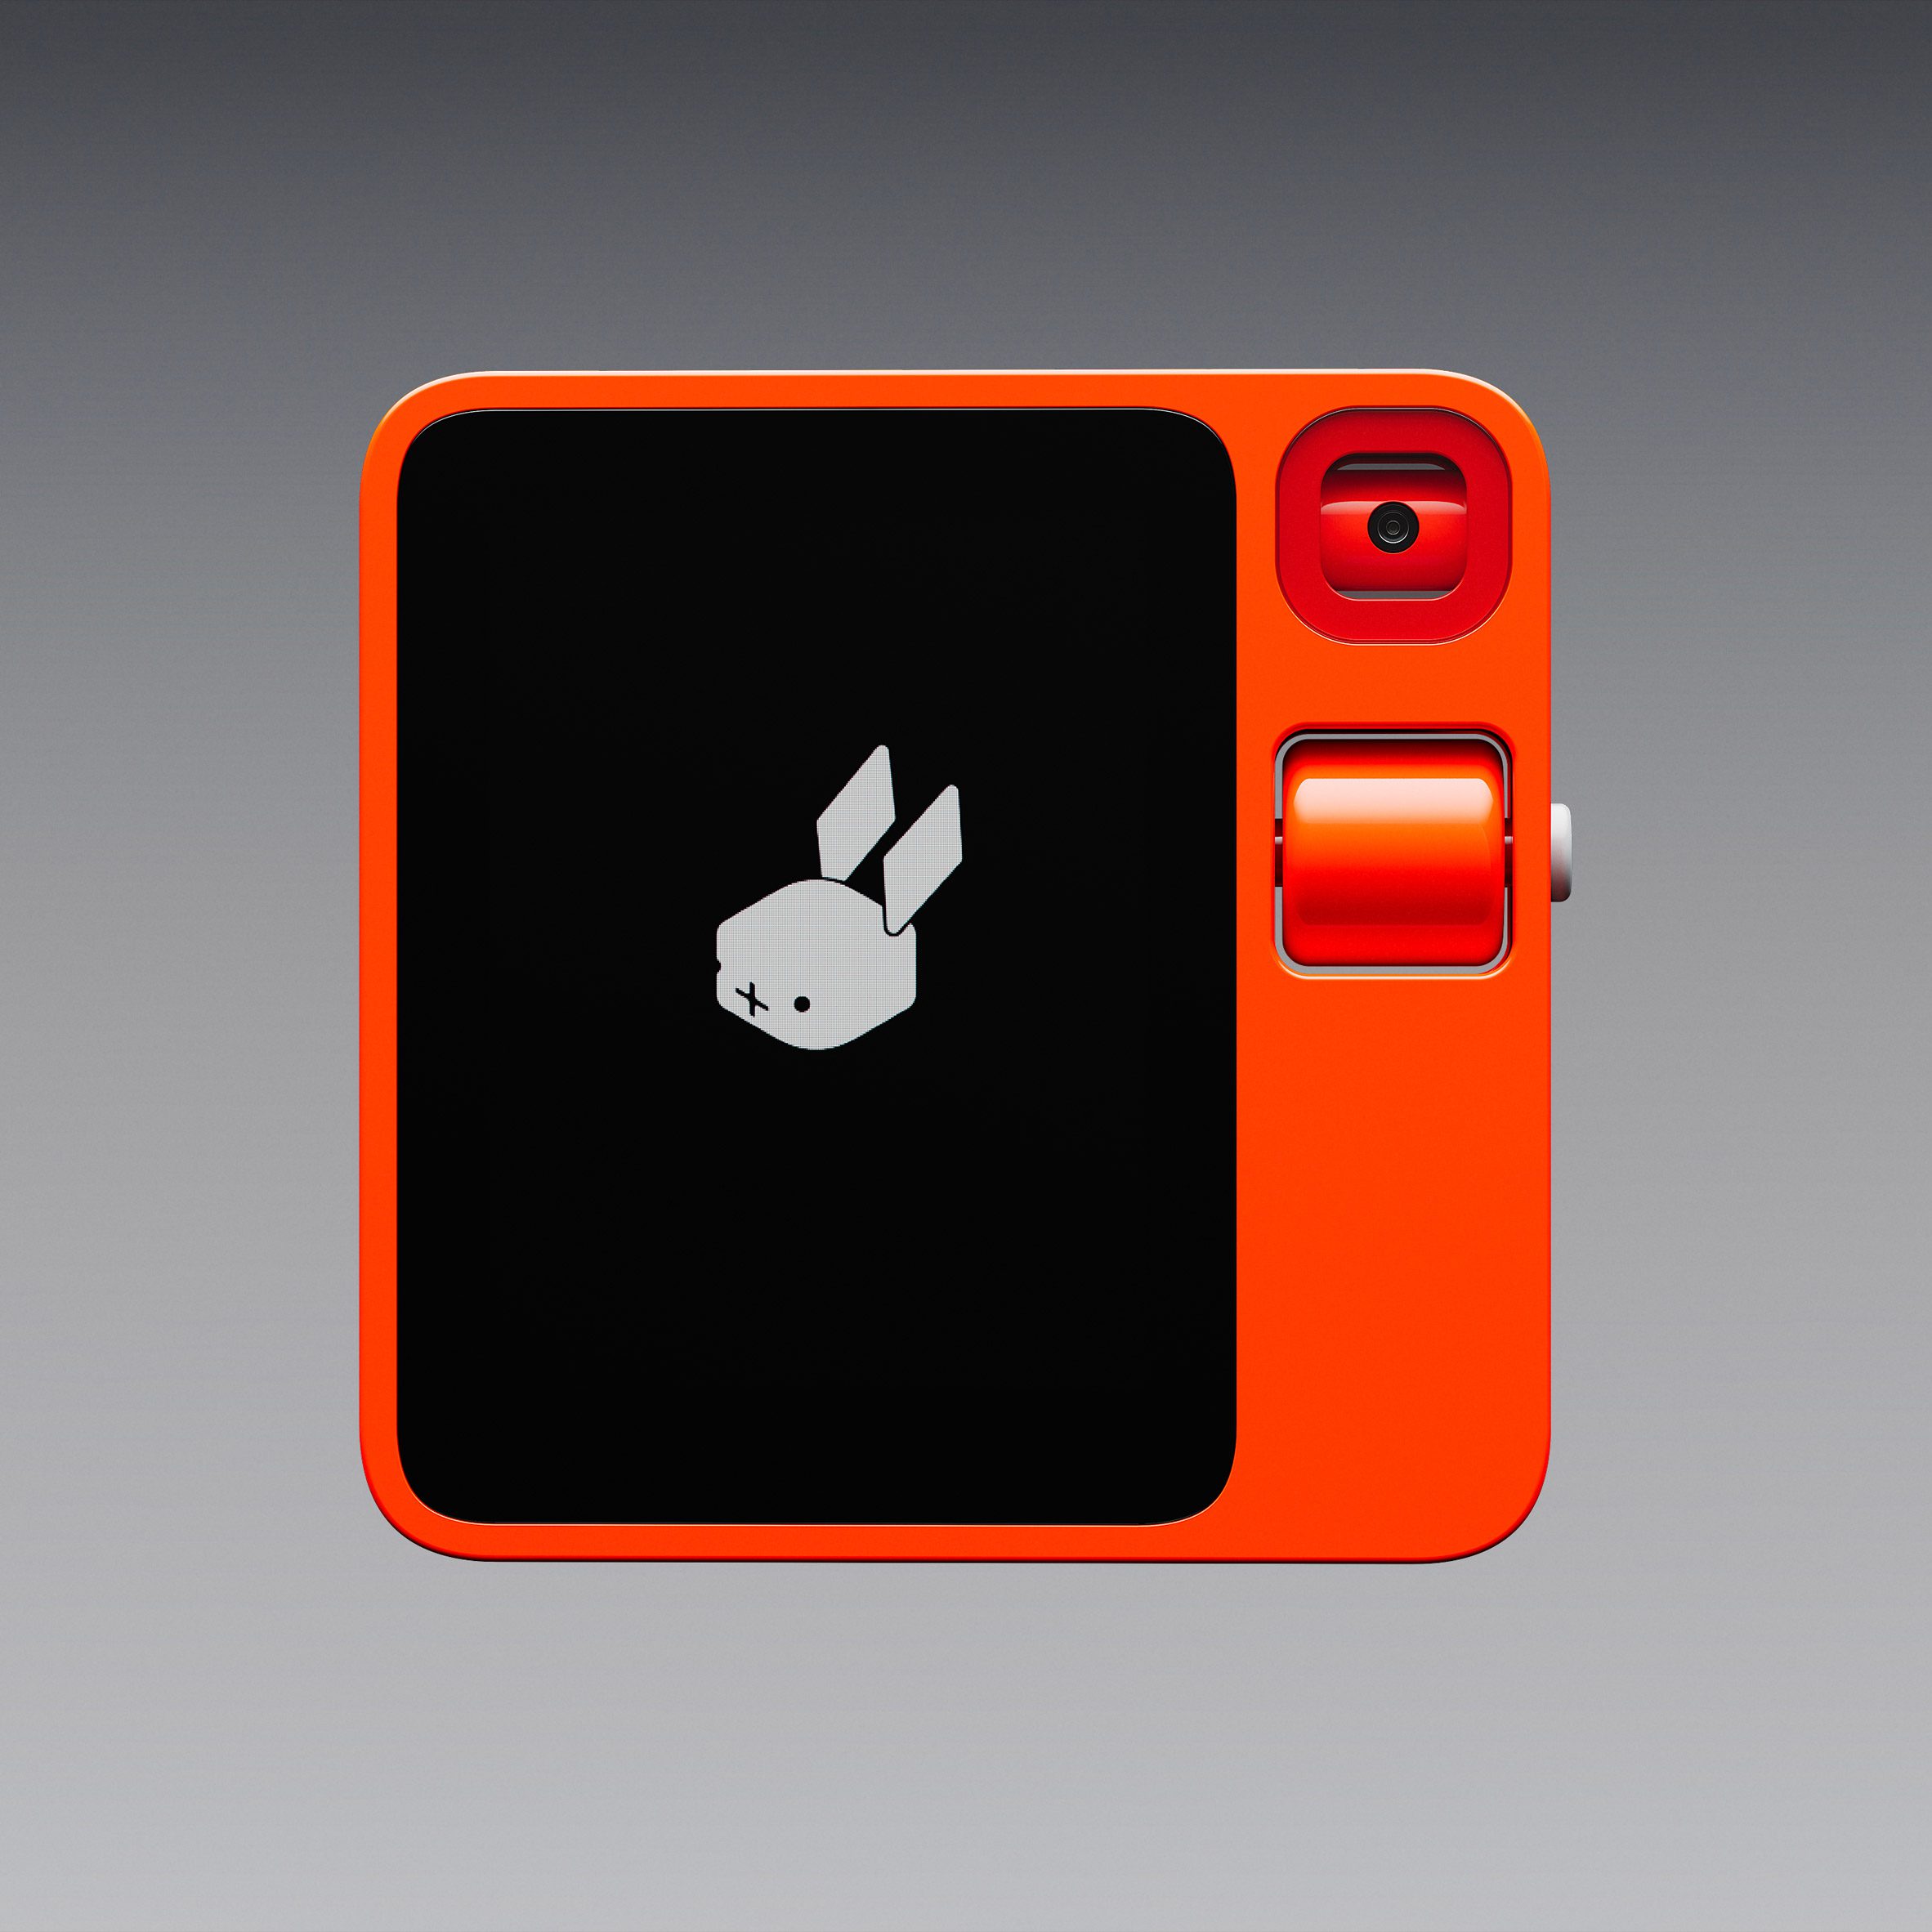 Image of the Rabbit R1 device front on, showing a bright orange square-shaped gadget with a screen on the left-hand side and a camera lens and scroll button on the right